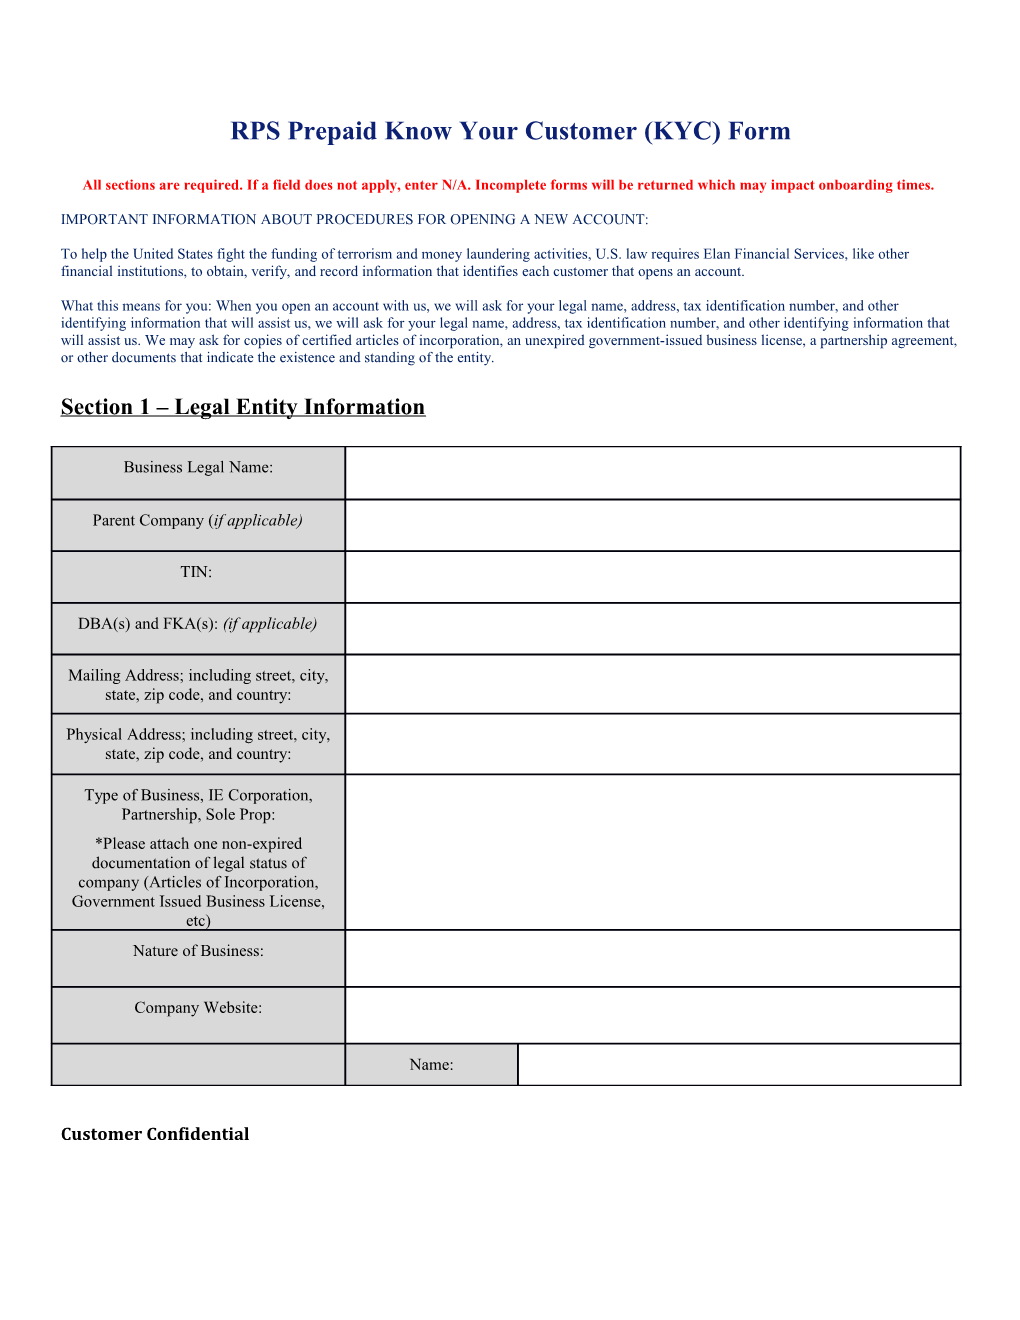 RPS Prepaid Know Your Customer (KYC) Form